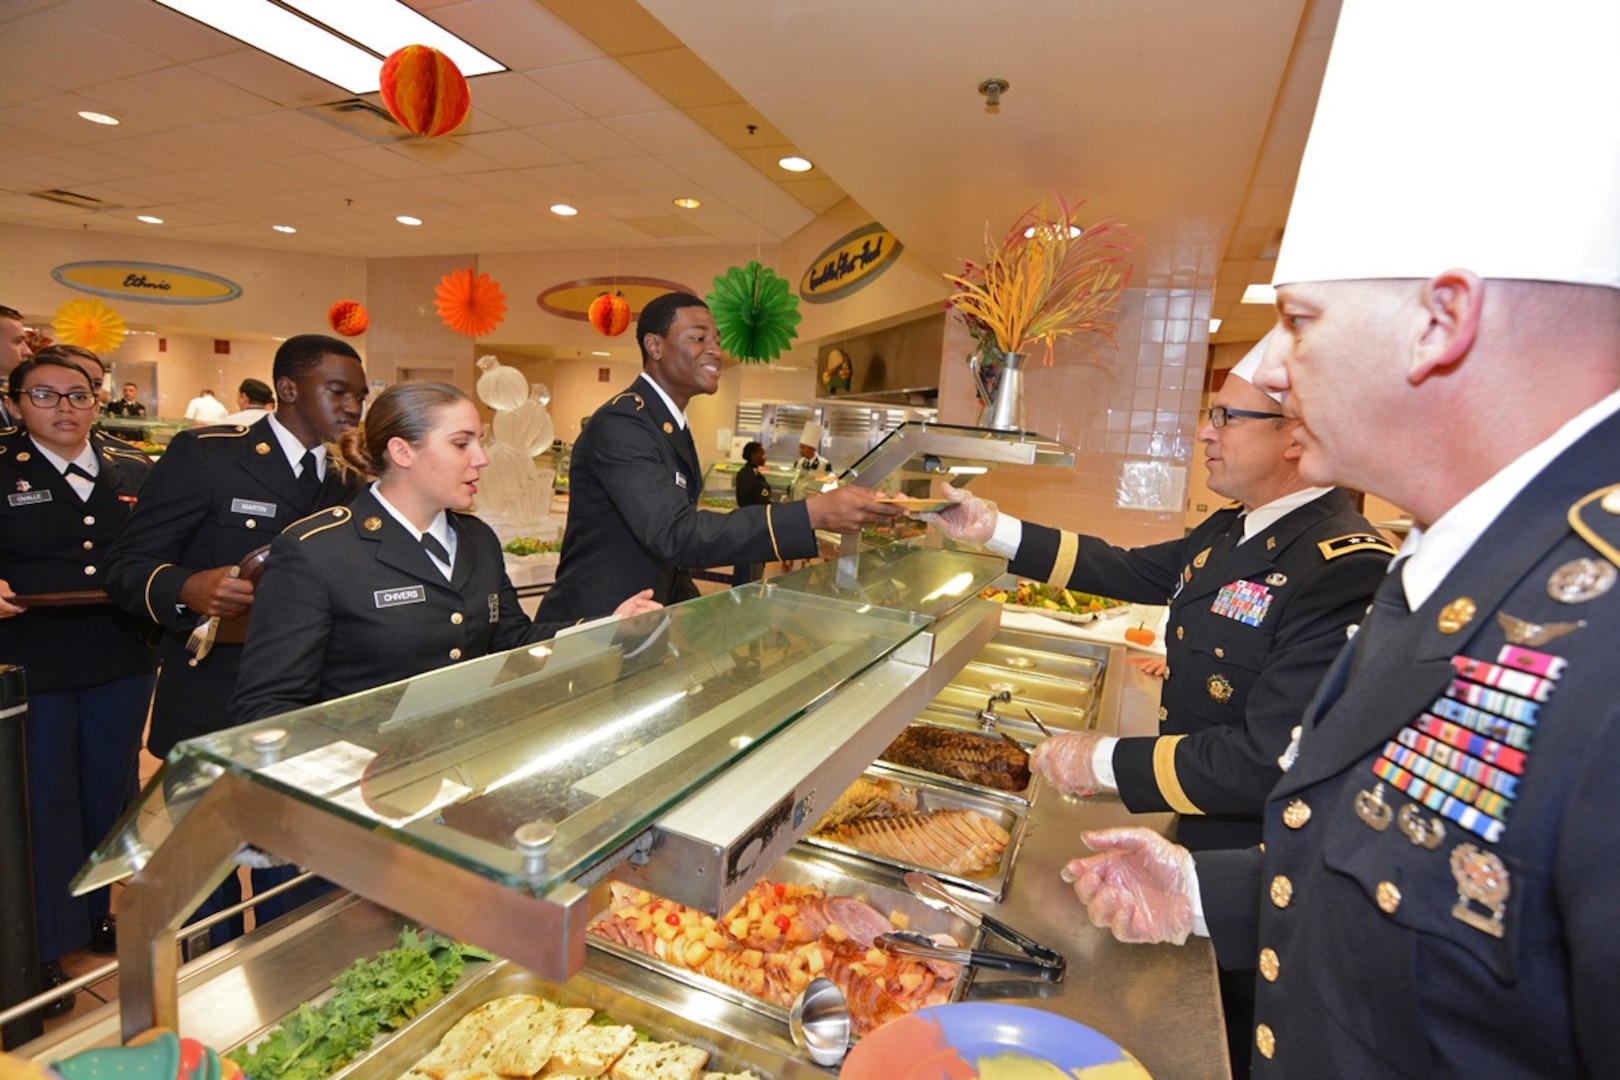 Maj. Gen. Brian C. Lein, Commanding General, Army Medical Department Center & School at Joint Base San Antonio-Fort Sam Houston, AMEDDC&S Command Sgt. Maj. Buck O'Neal and other leaders serve Thanksgiving dinner to Soldiers at the Rocco Dining Facility at JBSA-Fort Sam Houston Nov. 23.